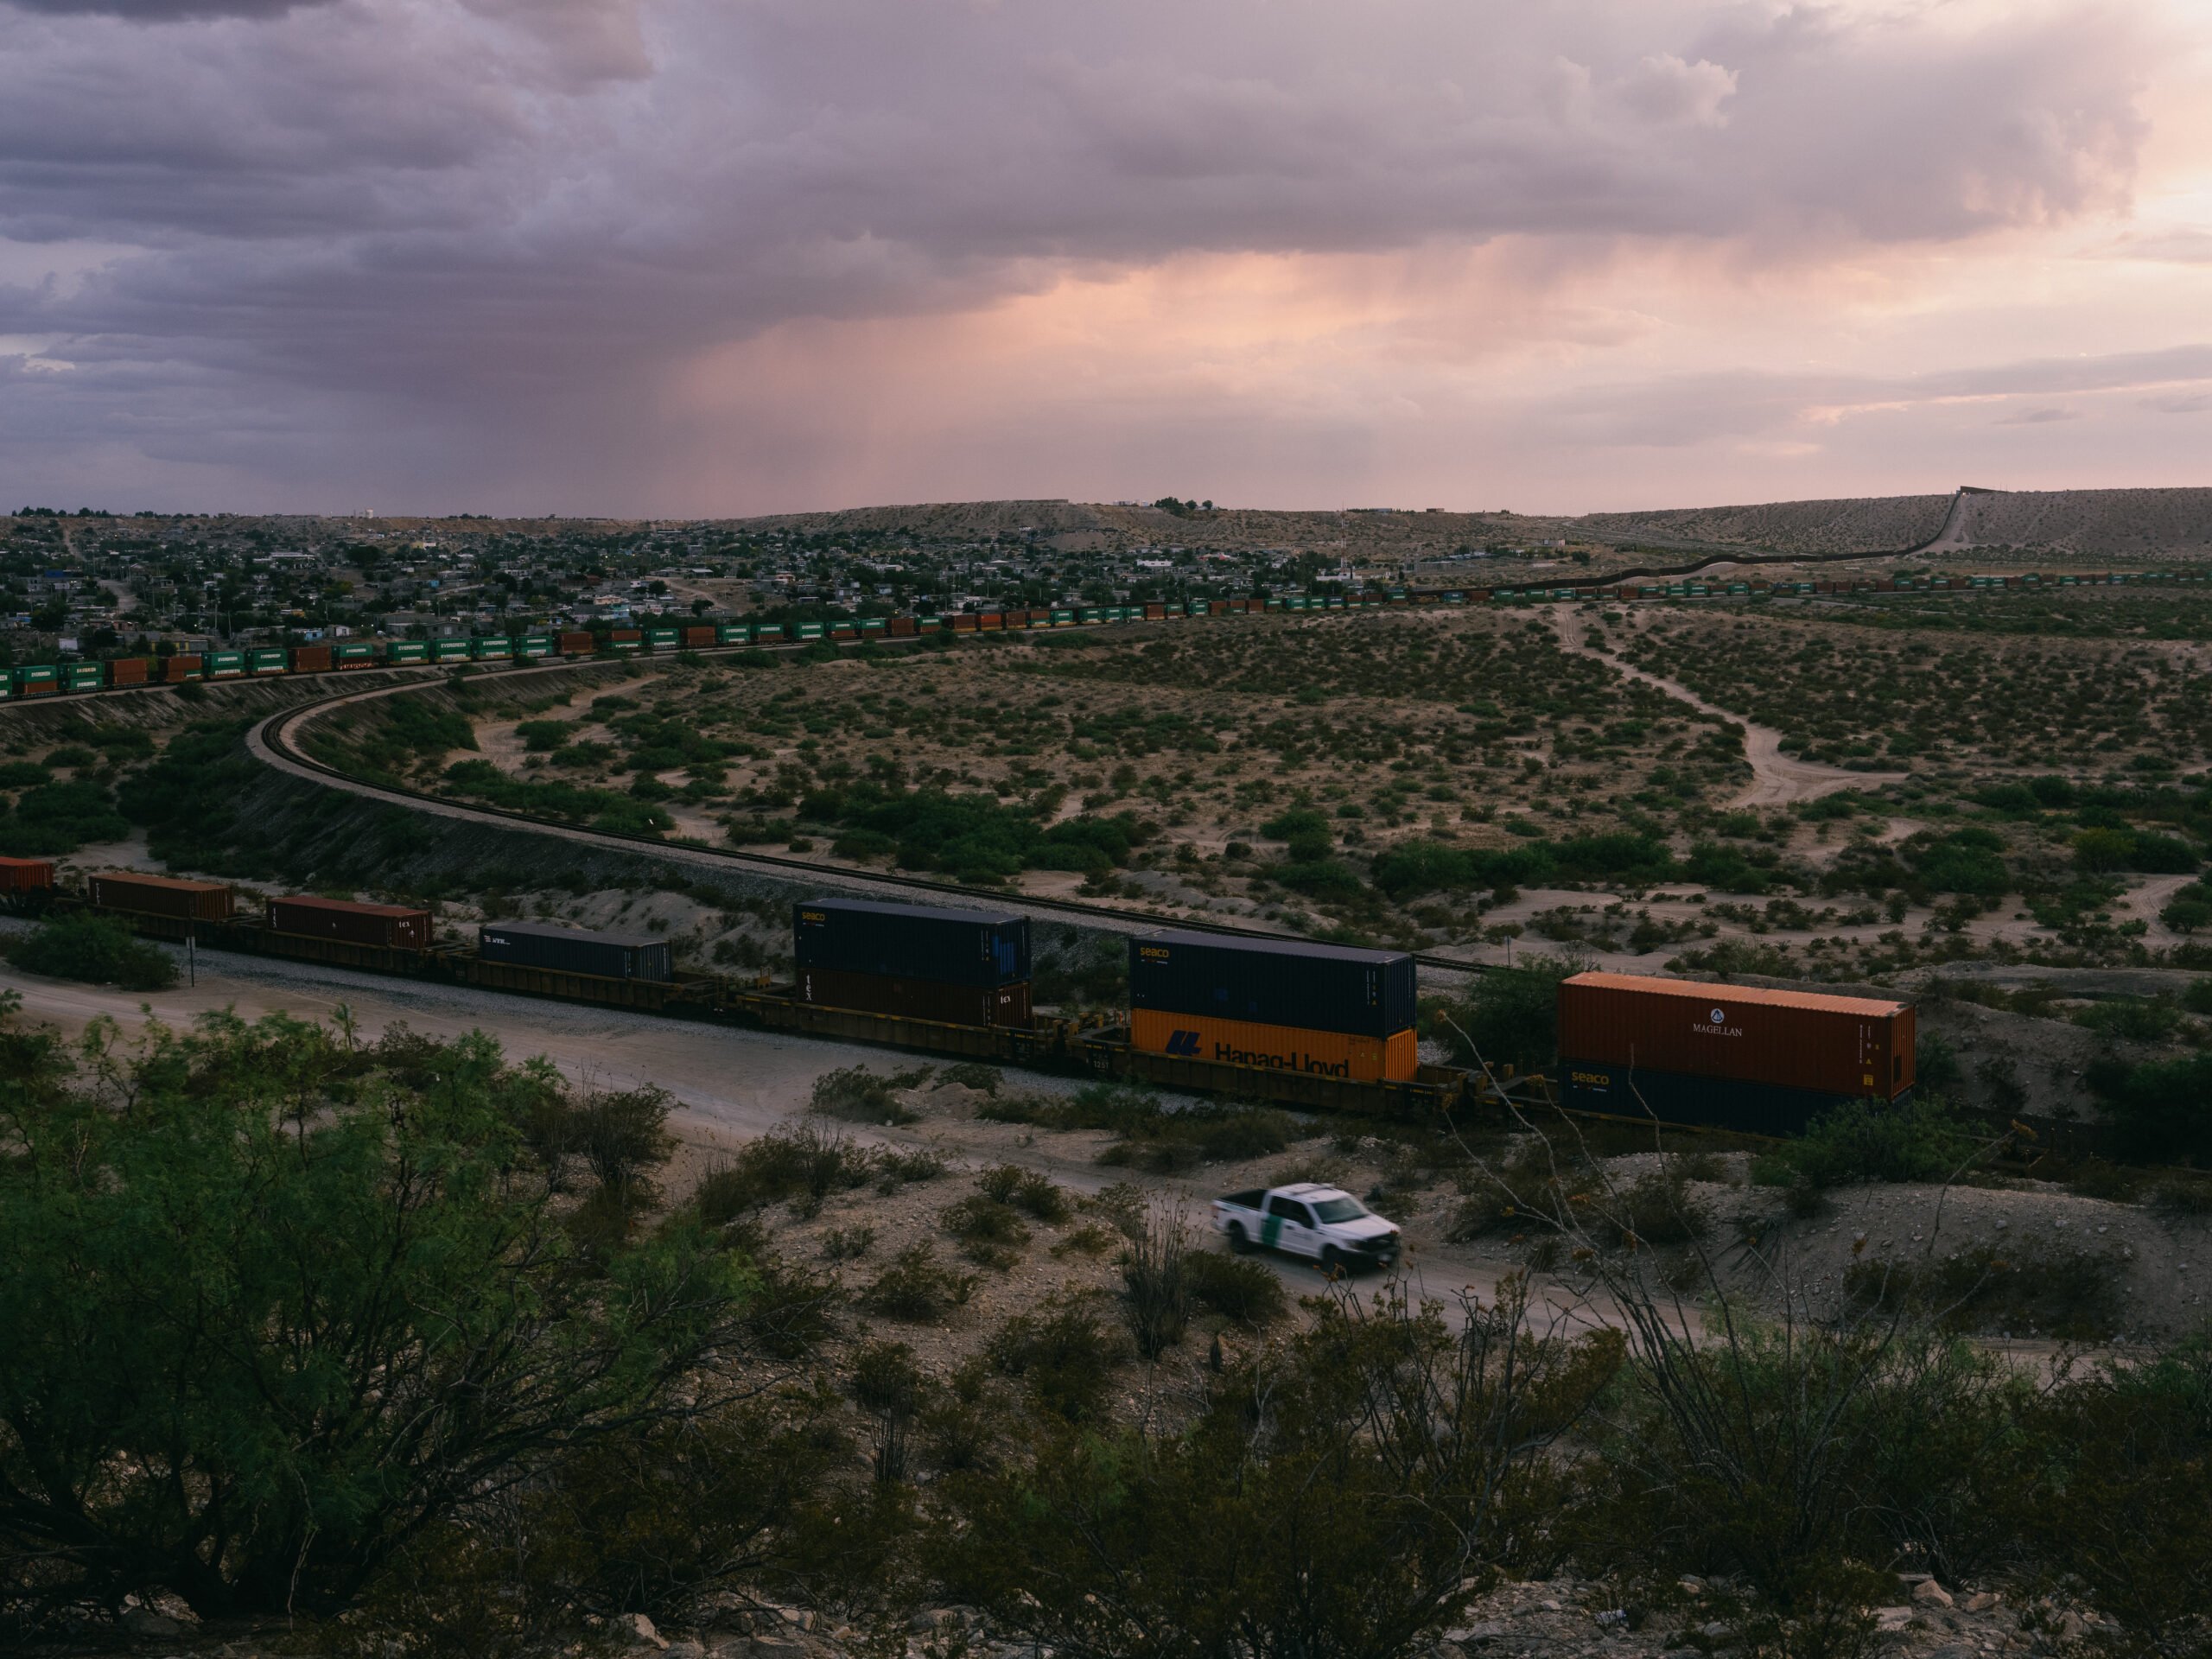 A wide-angle view of the train curving through the countryside. The border patrol pickup truck seems tiny in comparison to the massive train. The sky is cloudy and ominous.